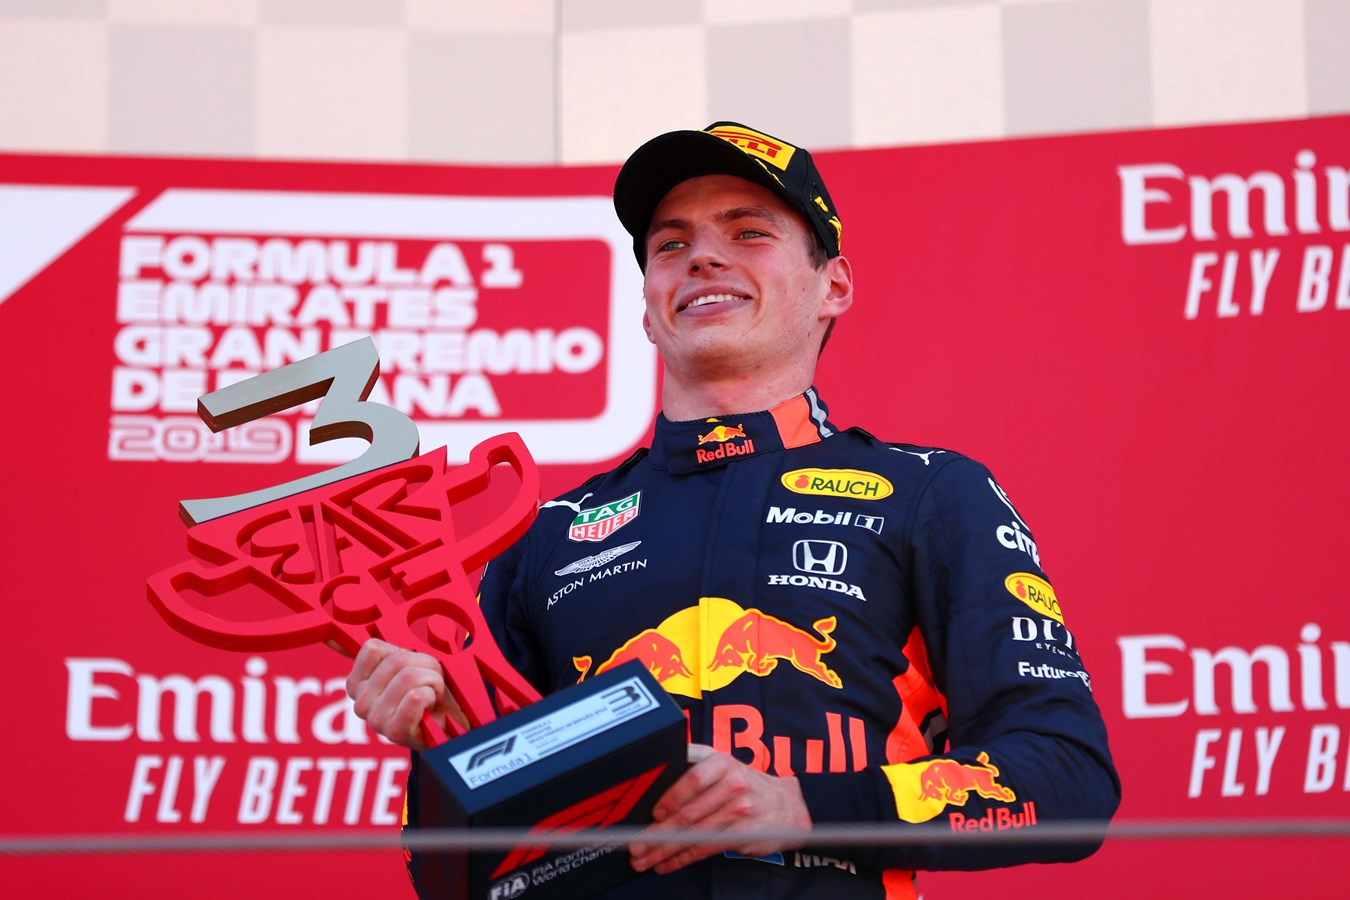 Second podium finish for Red Bull Racing with Honda power